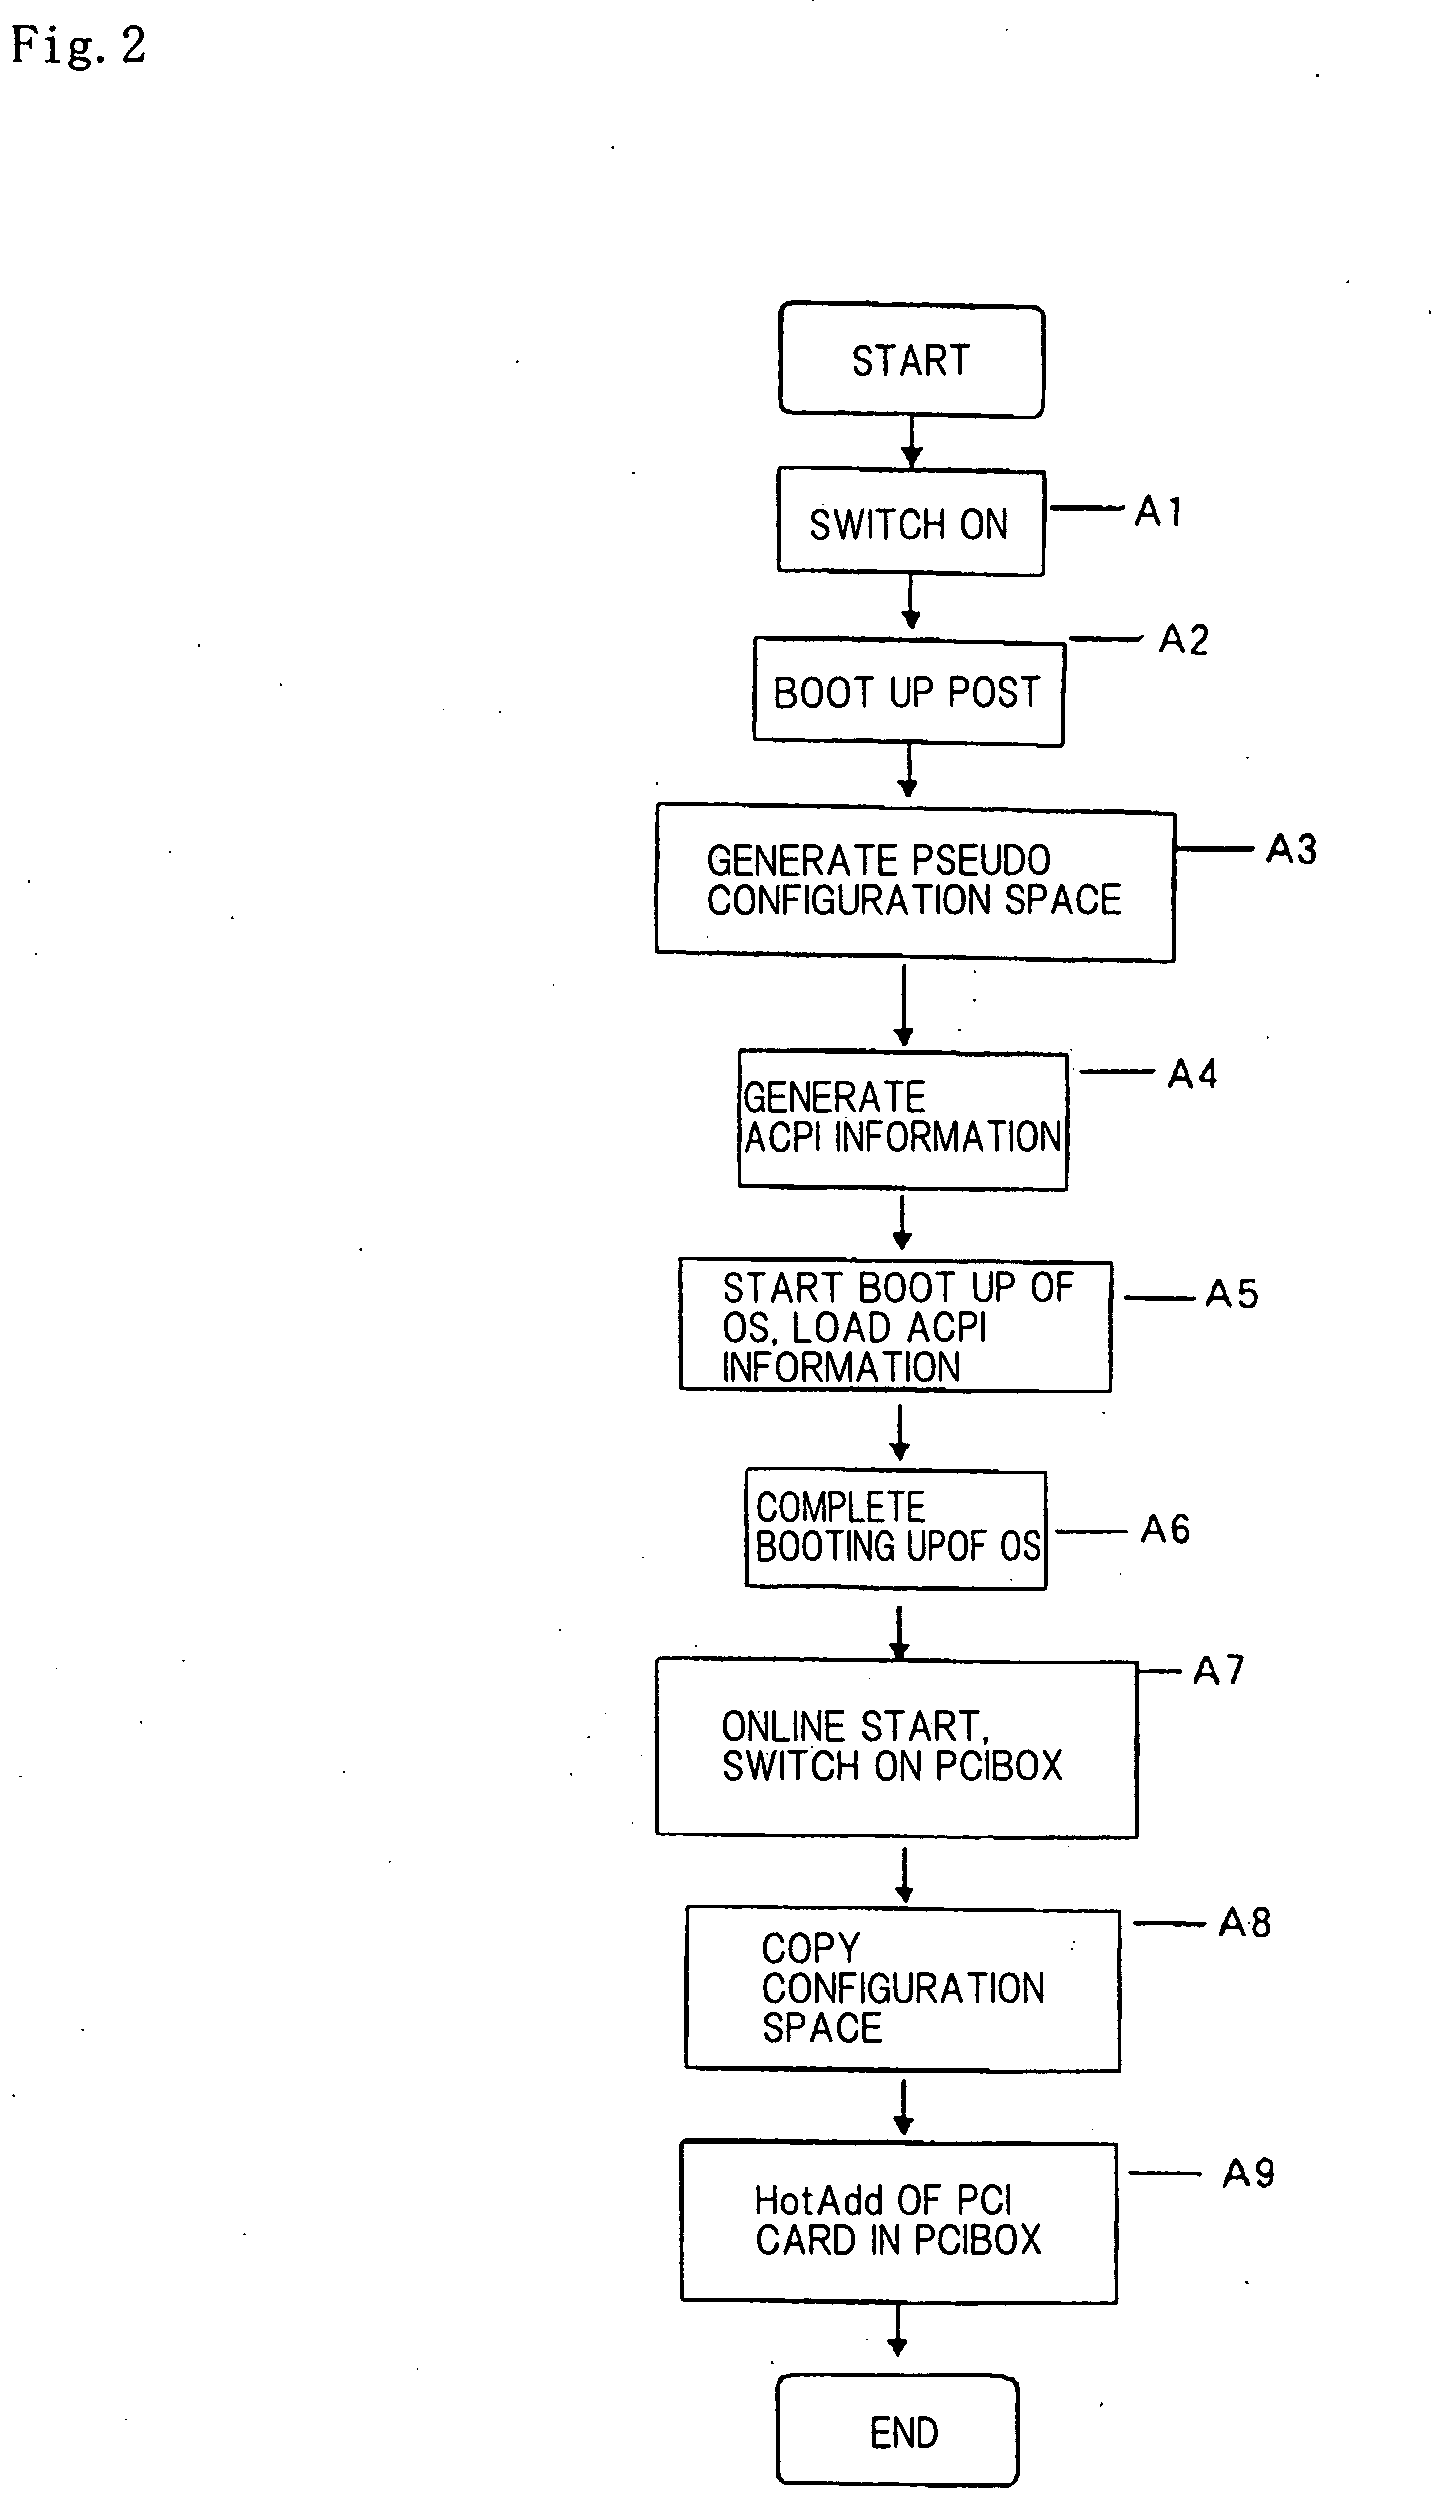 Hot-pluggable information processing device and setting method